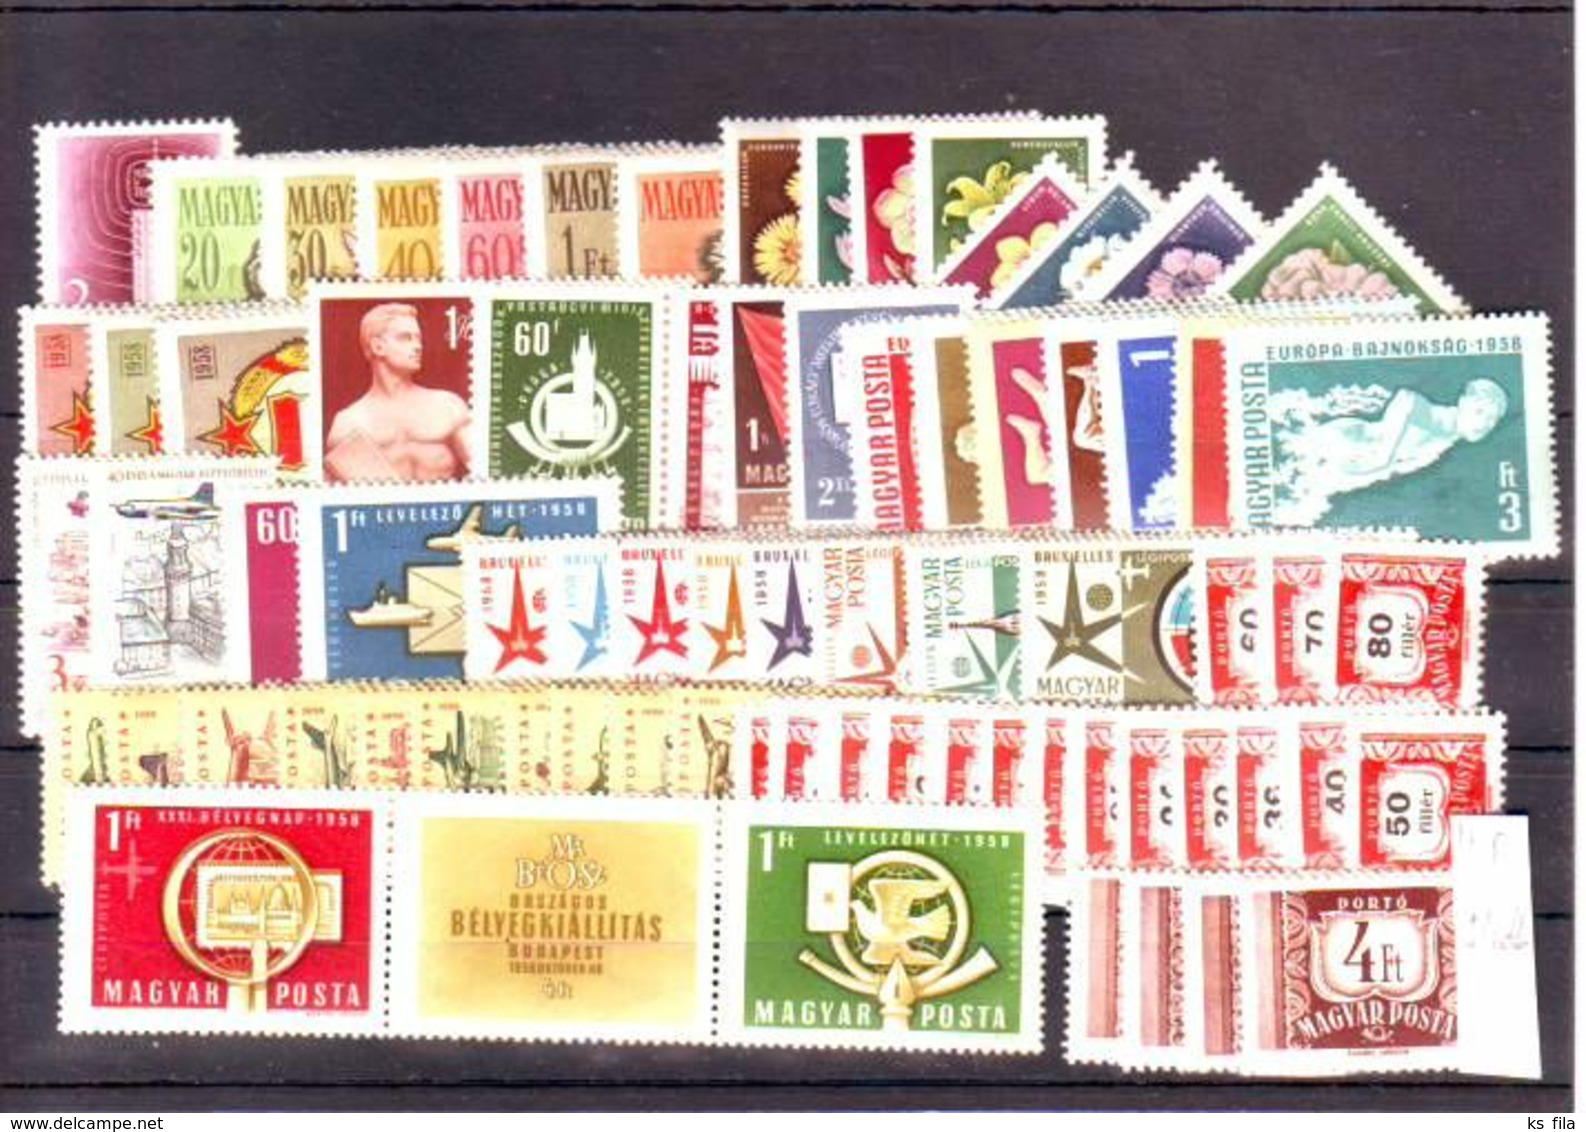 HUNGARY 1958 Full Year 54 Stamps + 3 Souvenir Sheets MNH - Annate Complete